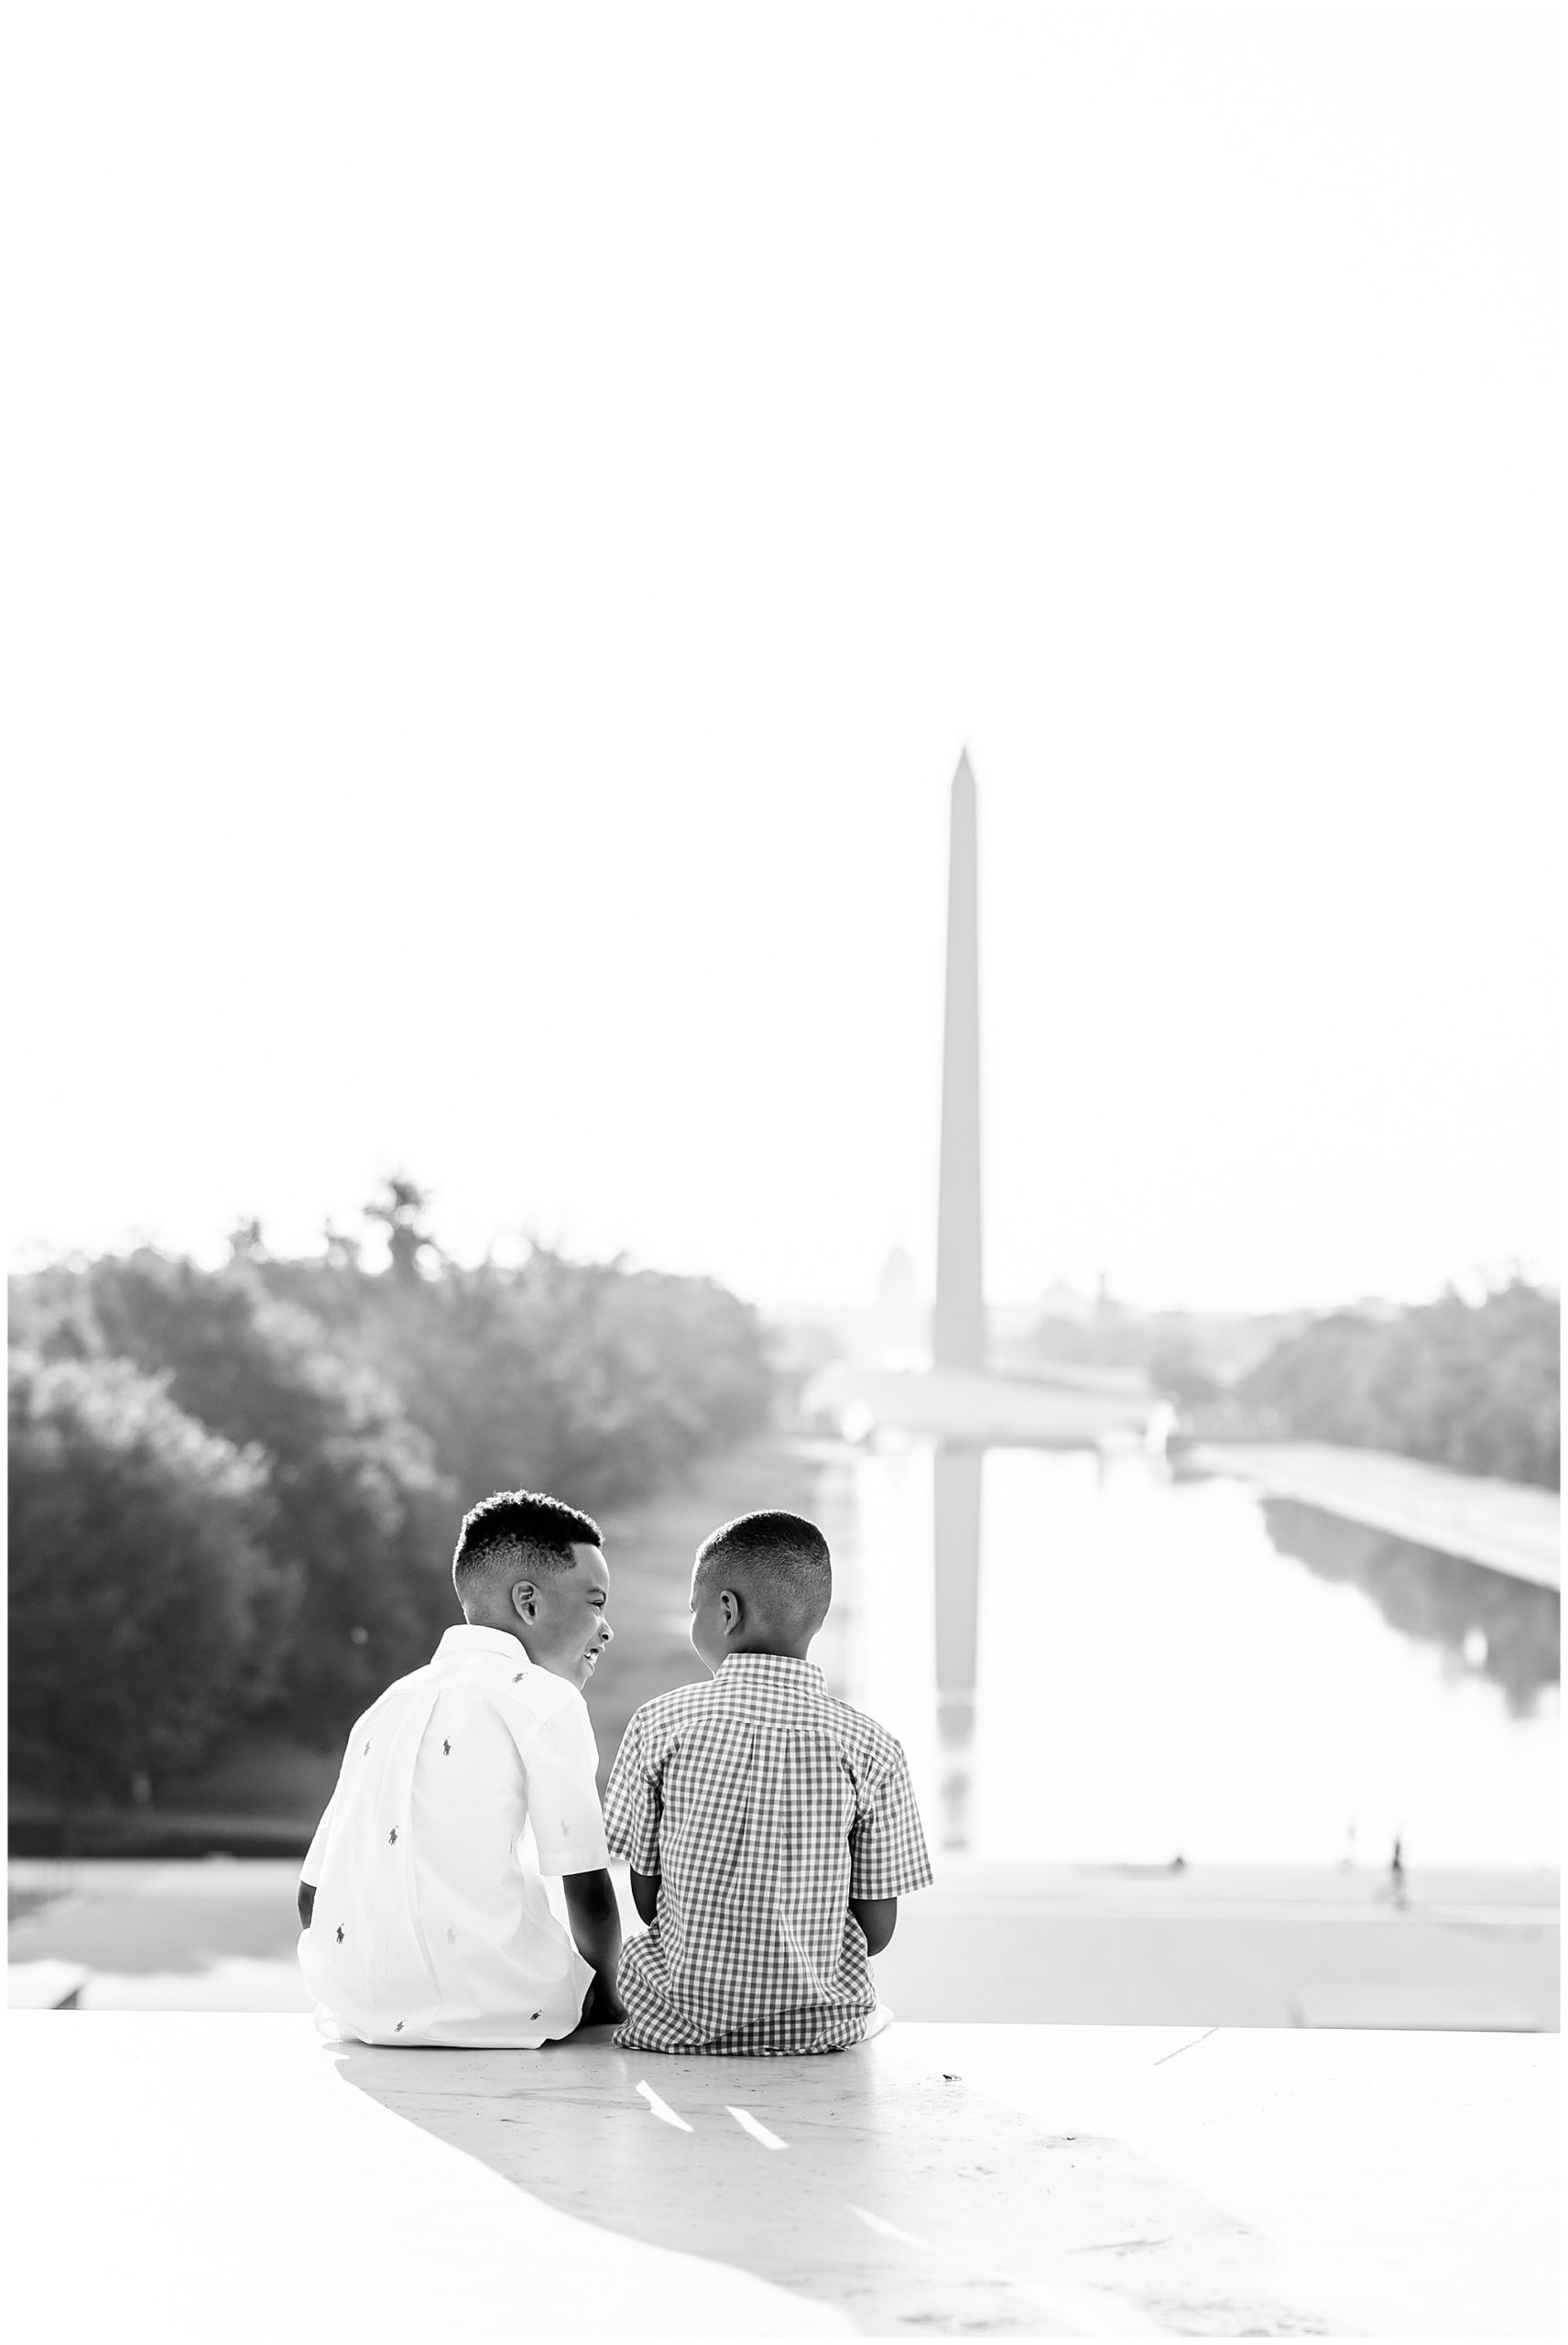 summer Lincoln Memorial family photos, Lincoln Memorial portraits, DC family photos, National Mall family photos, summer of four, family portrait poses, Lincoln Memorial portraits, DC family photographer, Rachel E.H. Photography, black and white, brothers sitting on steps, brothers laughing